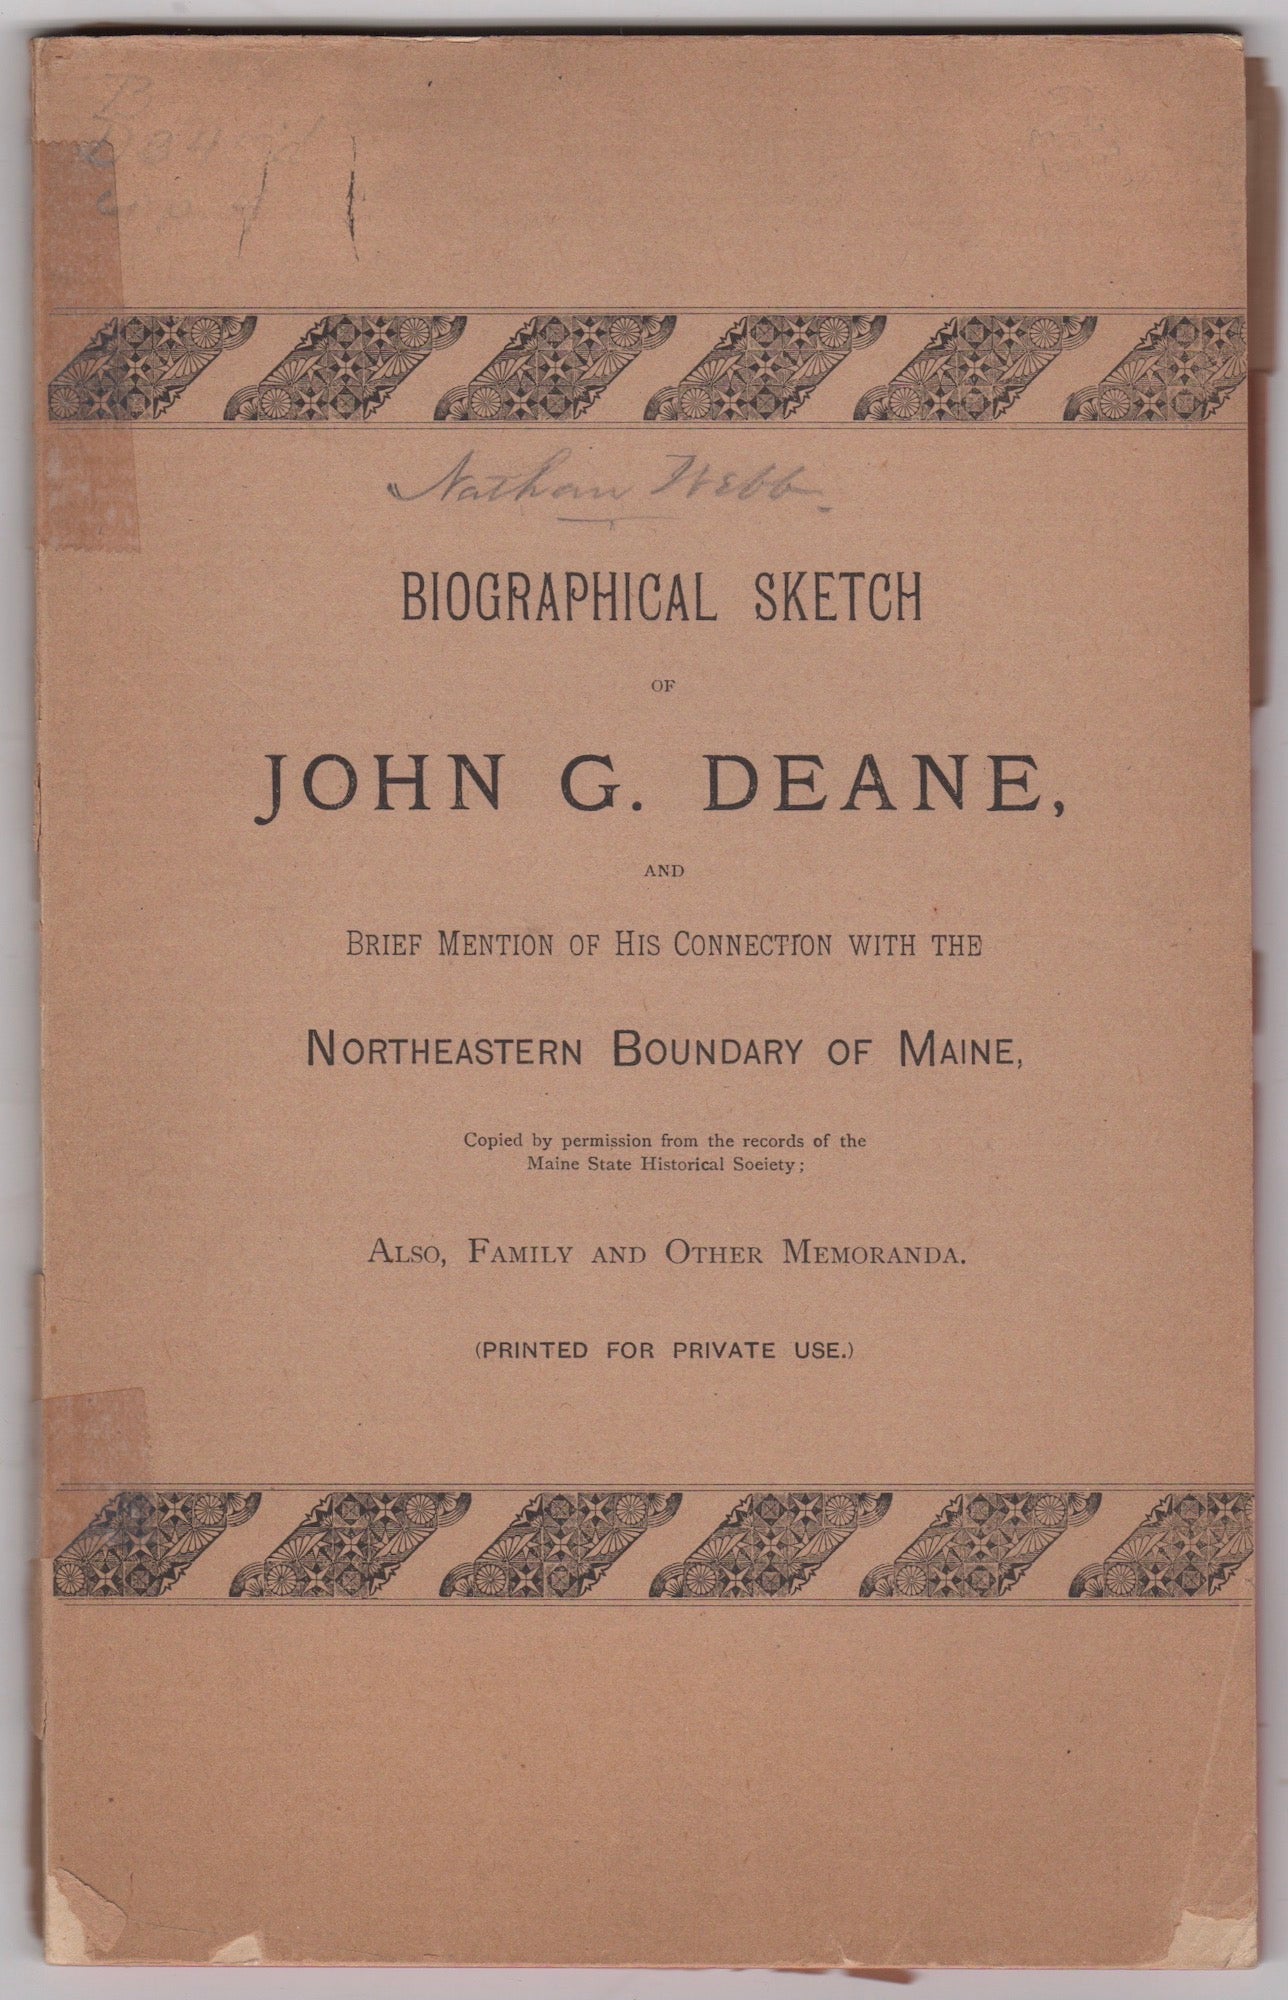 Deane, Llewellyn - Biographical Sketch of John G. Deane, and Brief Mention of His Connection with the Northeastern Boundary of Maine, Copied by Permission from the Records of the Maine State Historical Society; Also, Memoranda About Members of the Family, Old Residents of the City of Ellsworth, Maine, &C